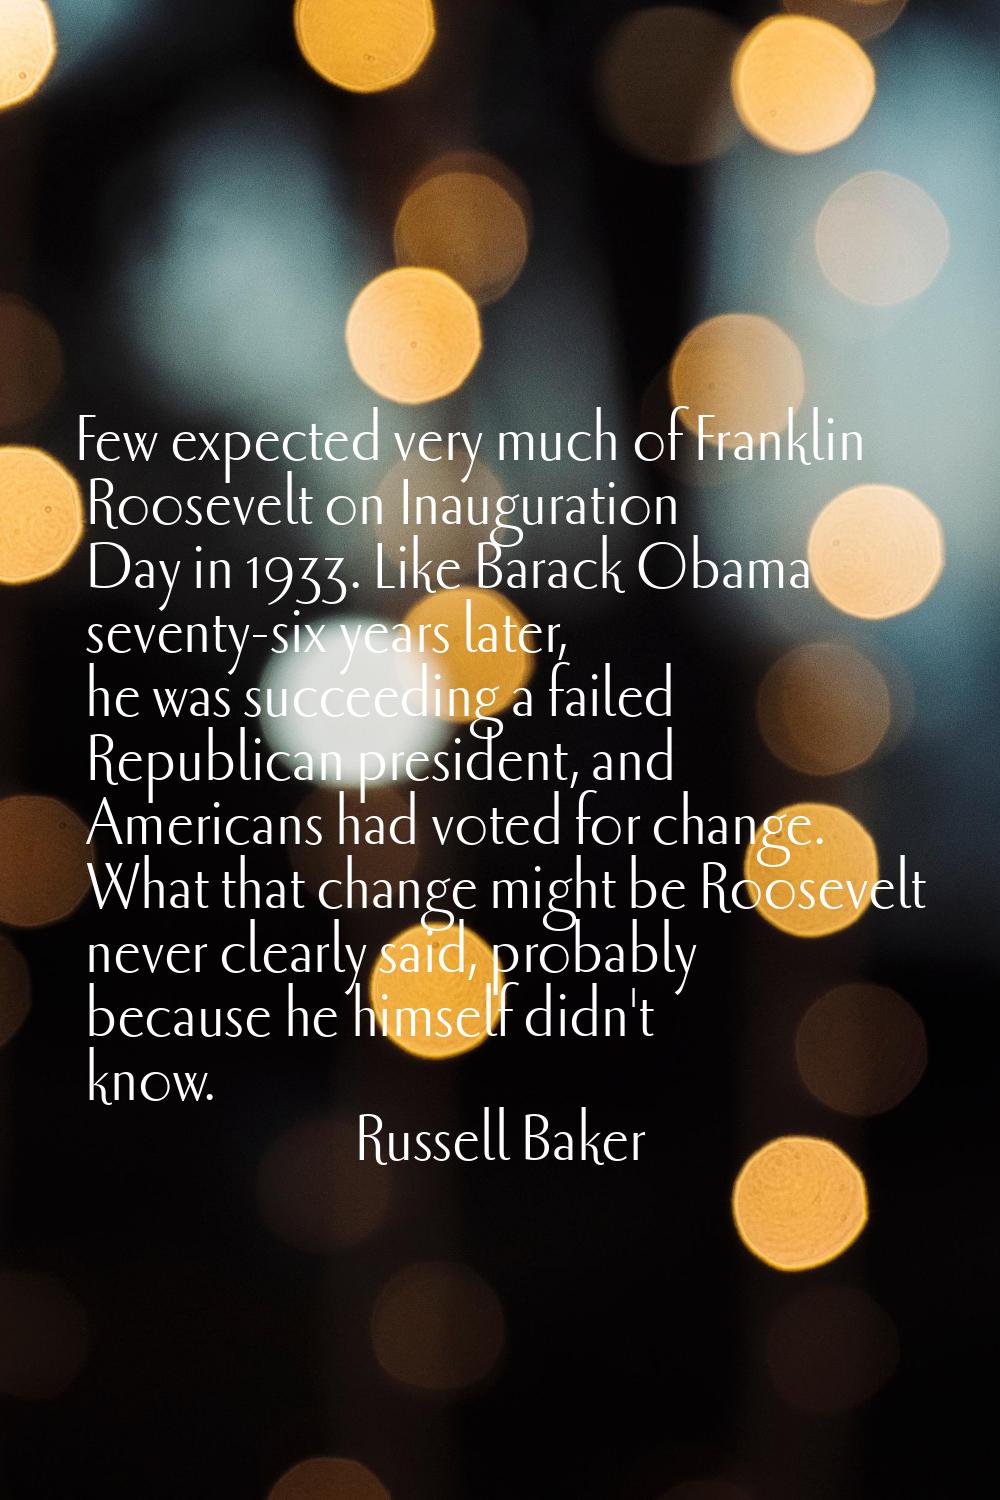 Few expected very much of Franklin Roosevelt on Inauguration Day in 1933. Like Barack Obama seventy